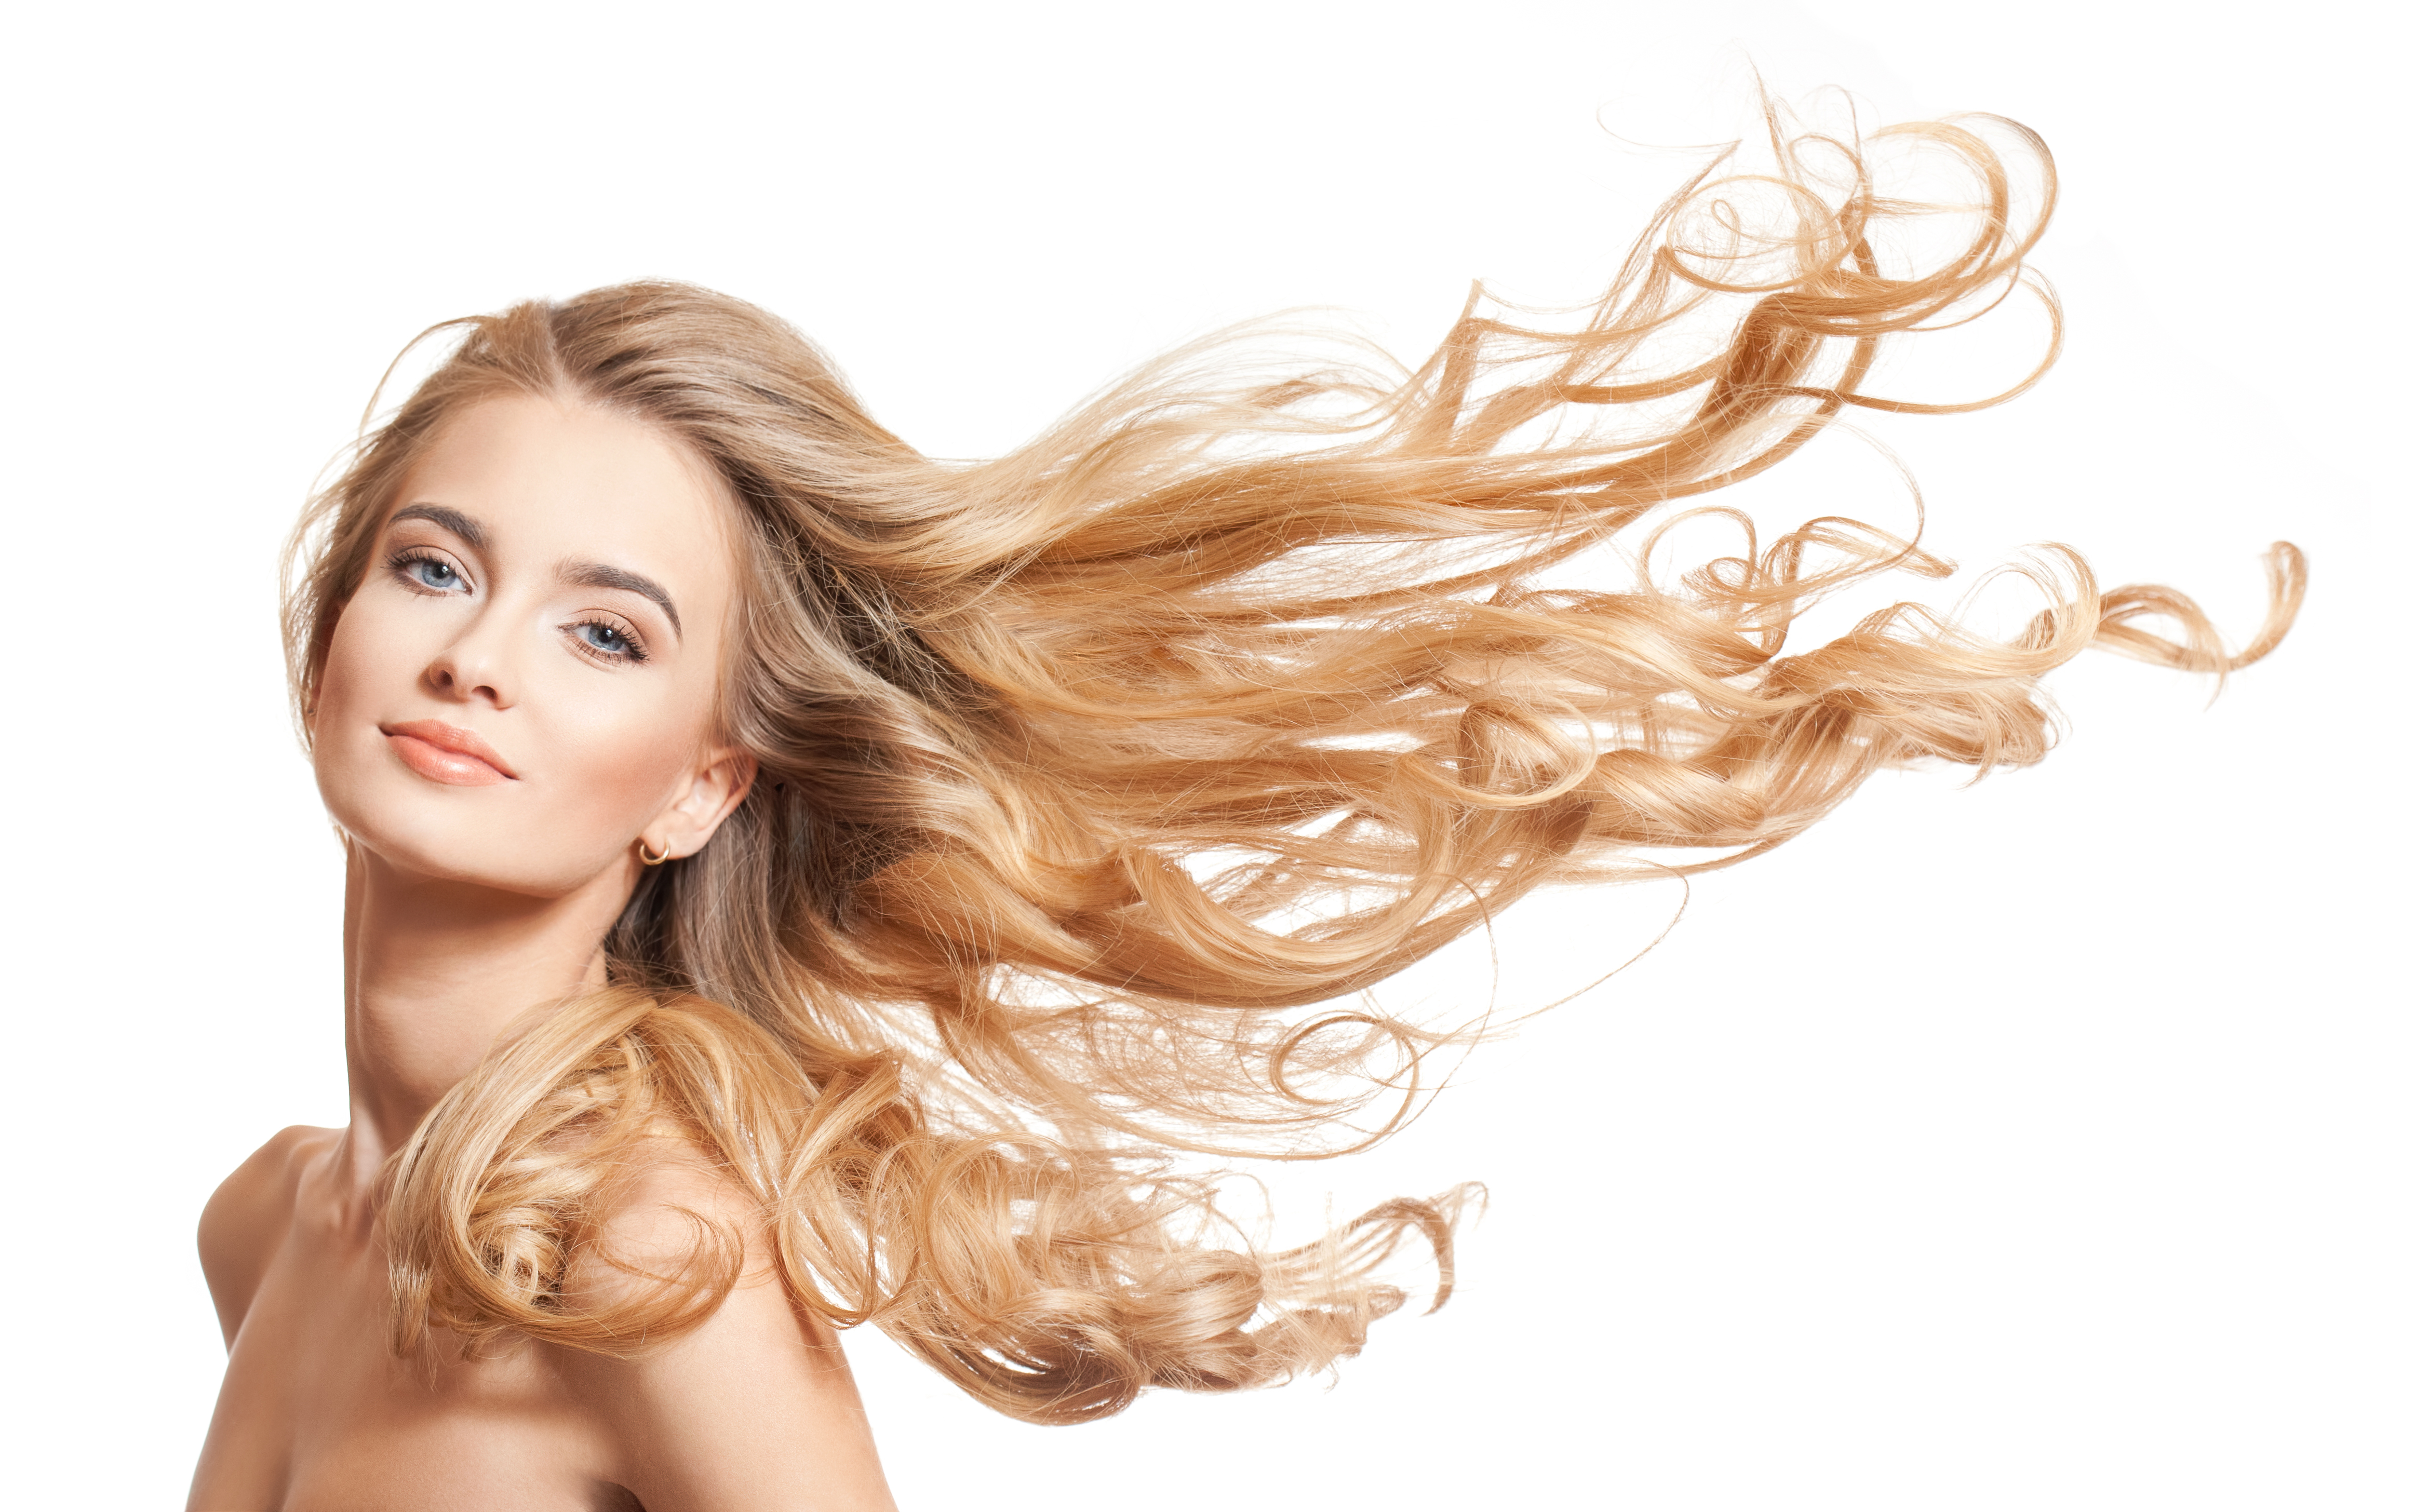 A woman with long, blonde hair | Source: Shutterstock